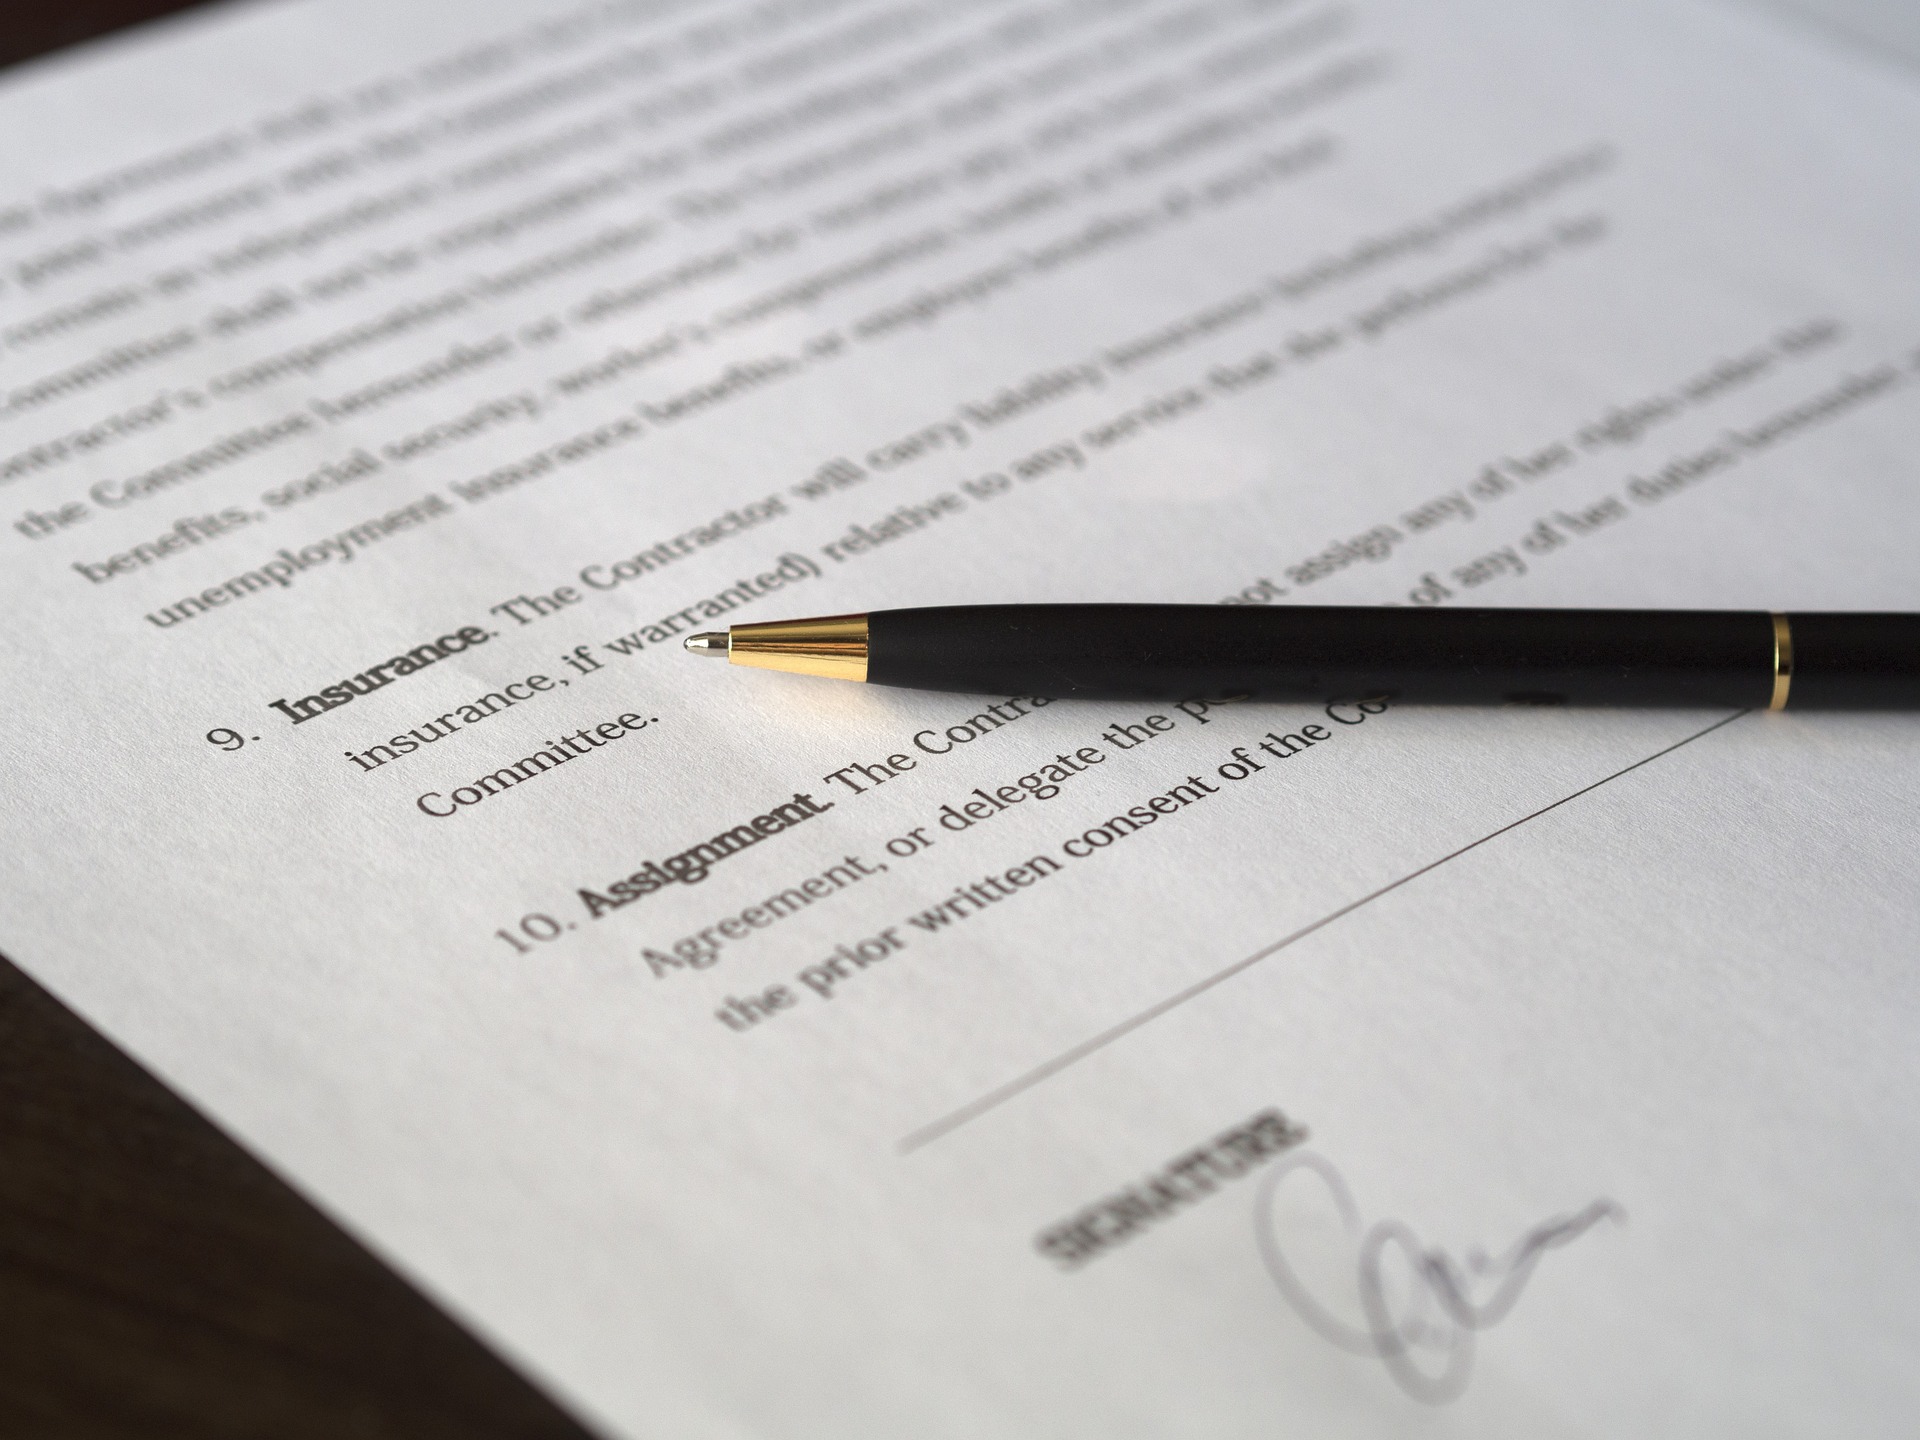 A signed contract showing an insurance clause